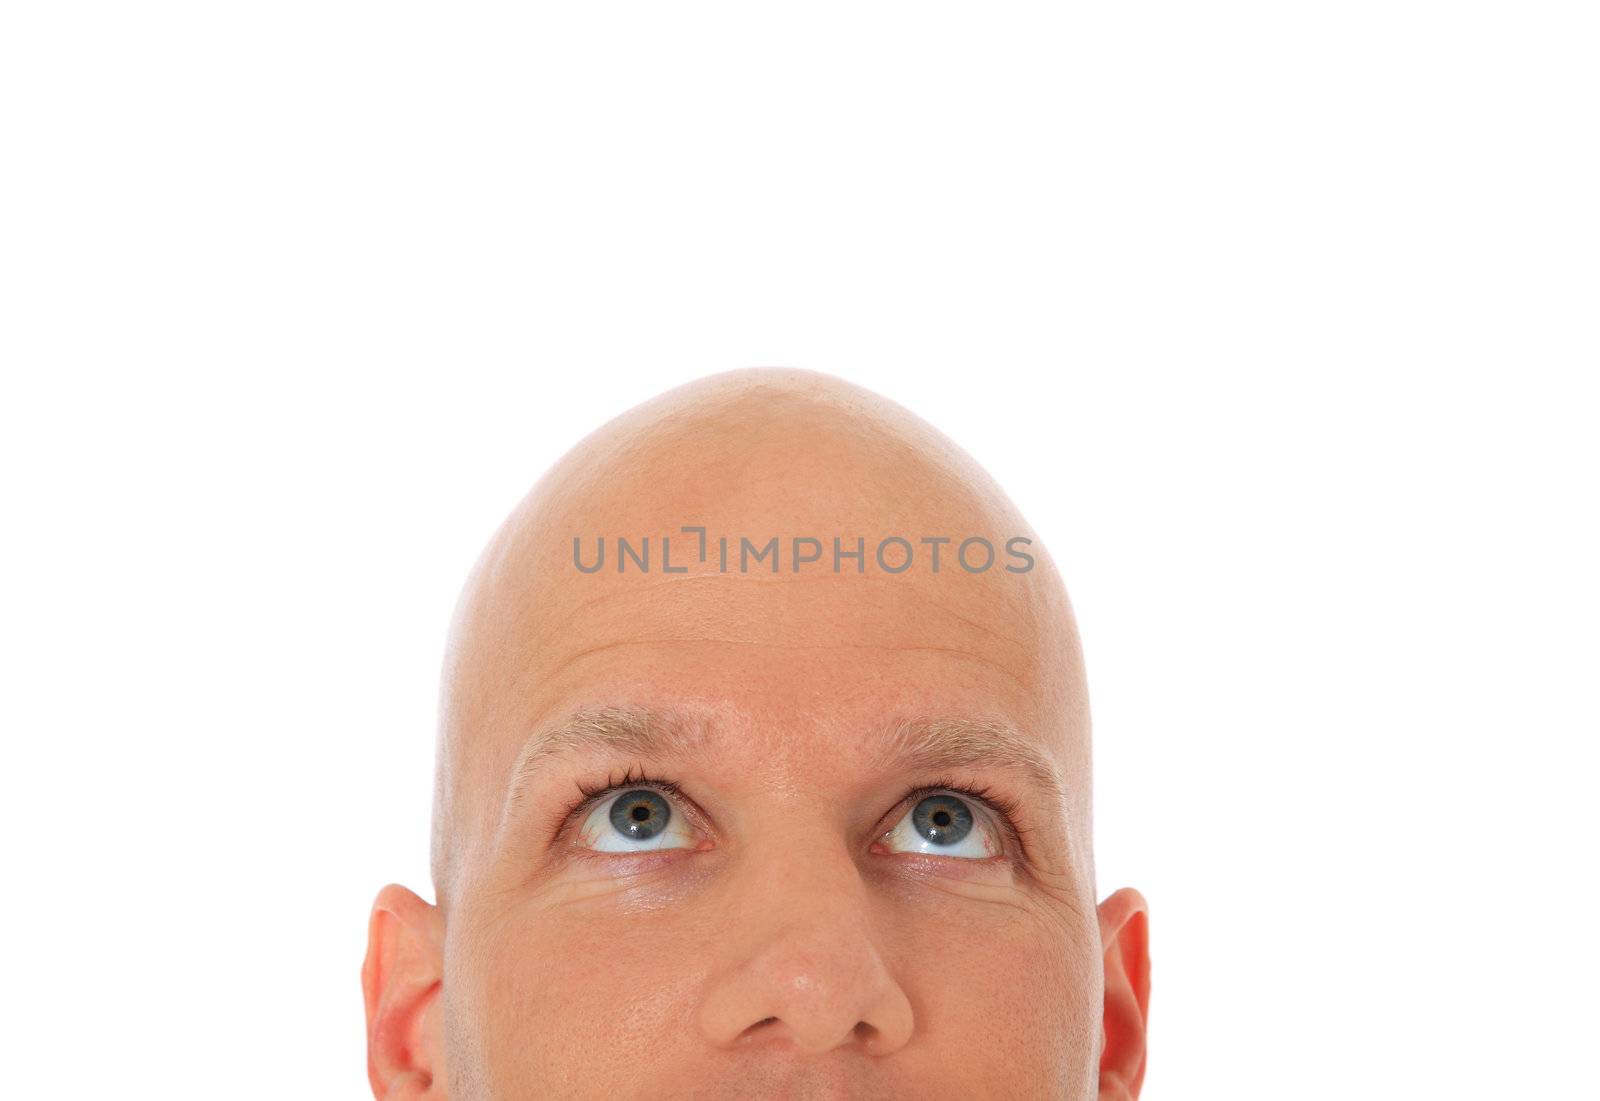 Head of bald man looking up. All on white background.